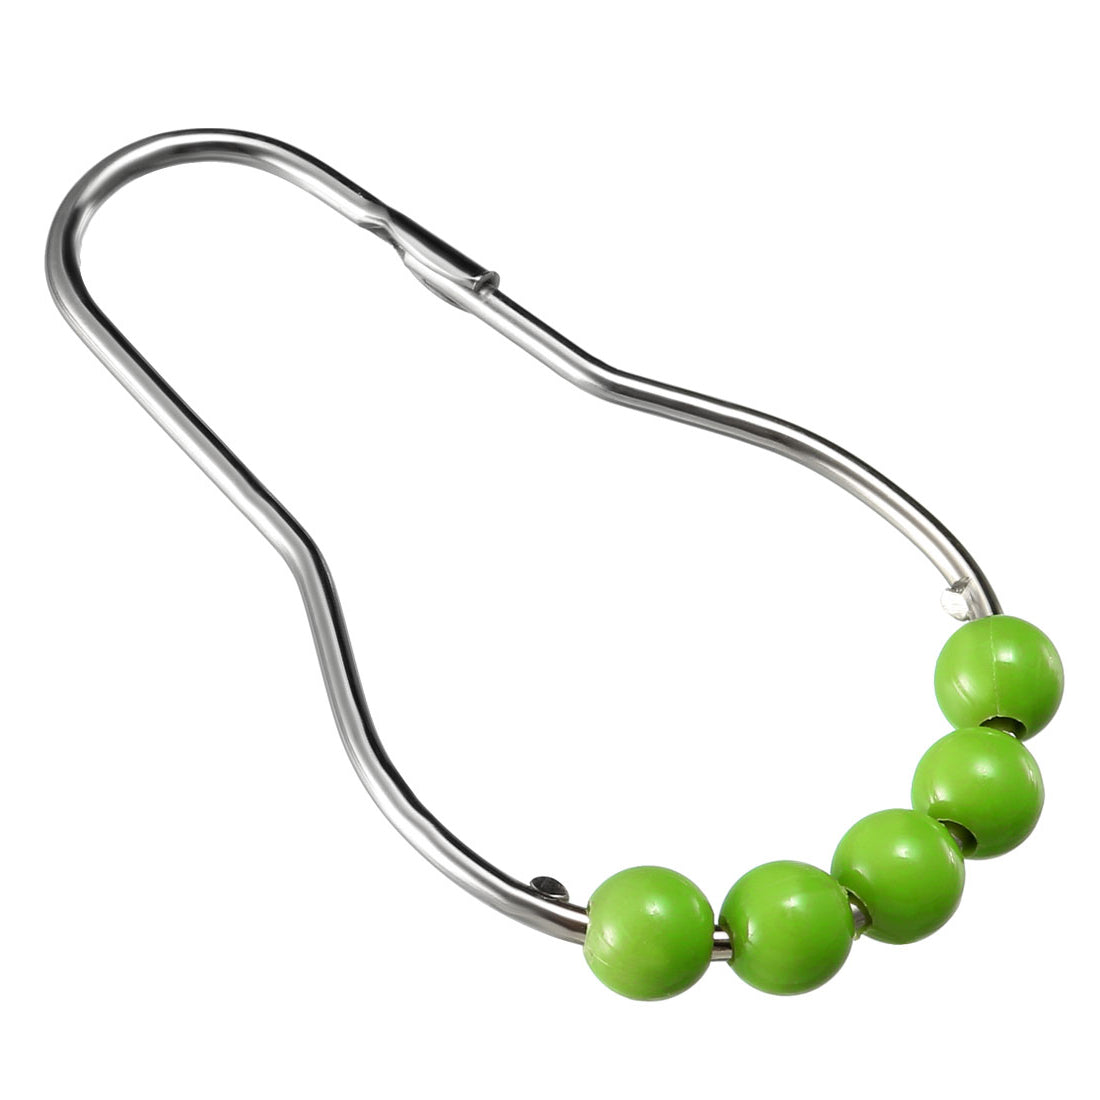 uxcell Uxcell Shower Curtain Ring Hooks Metal for Bathroom Shower Rods Curtains Liners Green Ball 12Pcs